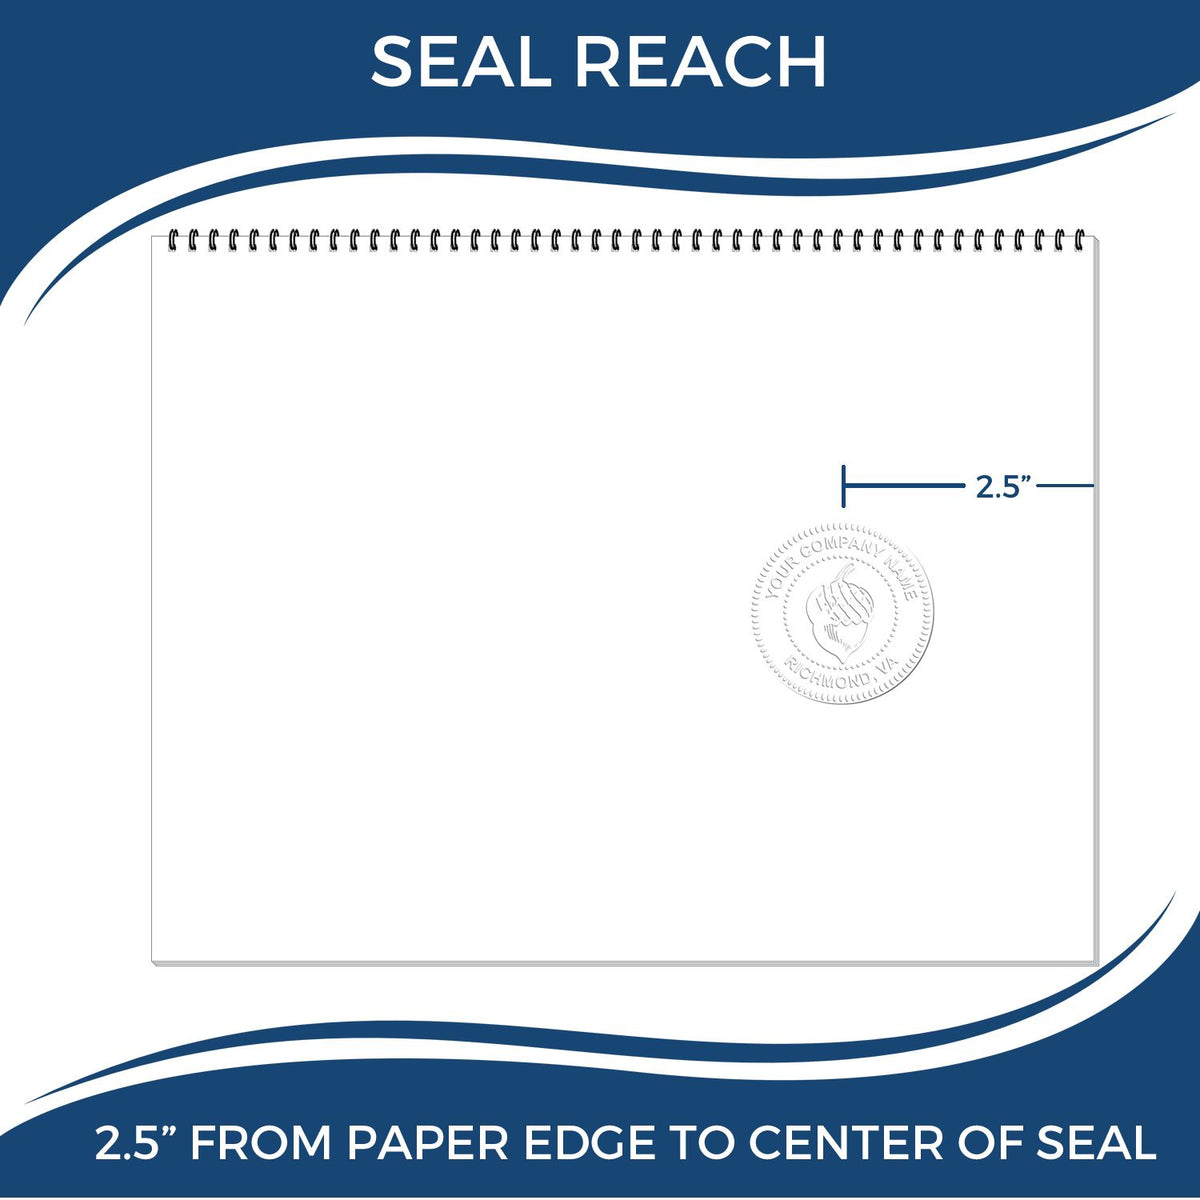 An infographic showing the seal reach which is represented by a ruler and a miniature seal image of the Long Reach Tennessee PE Seal